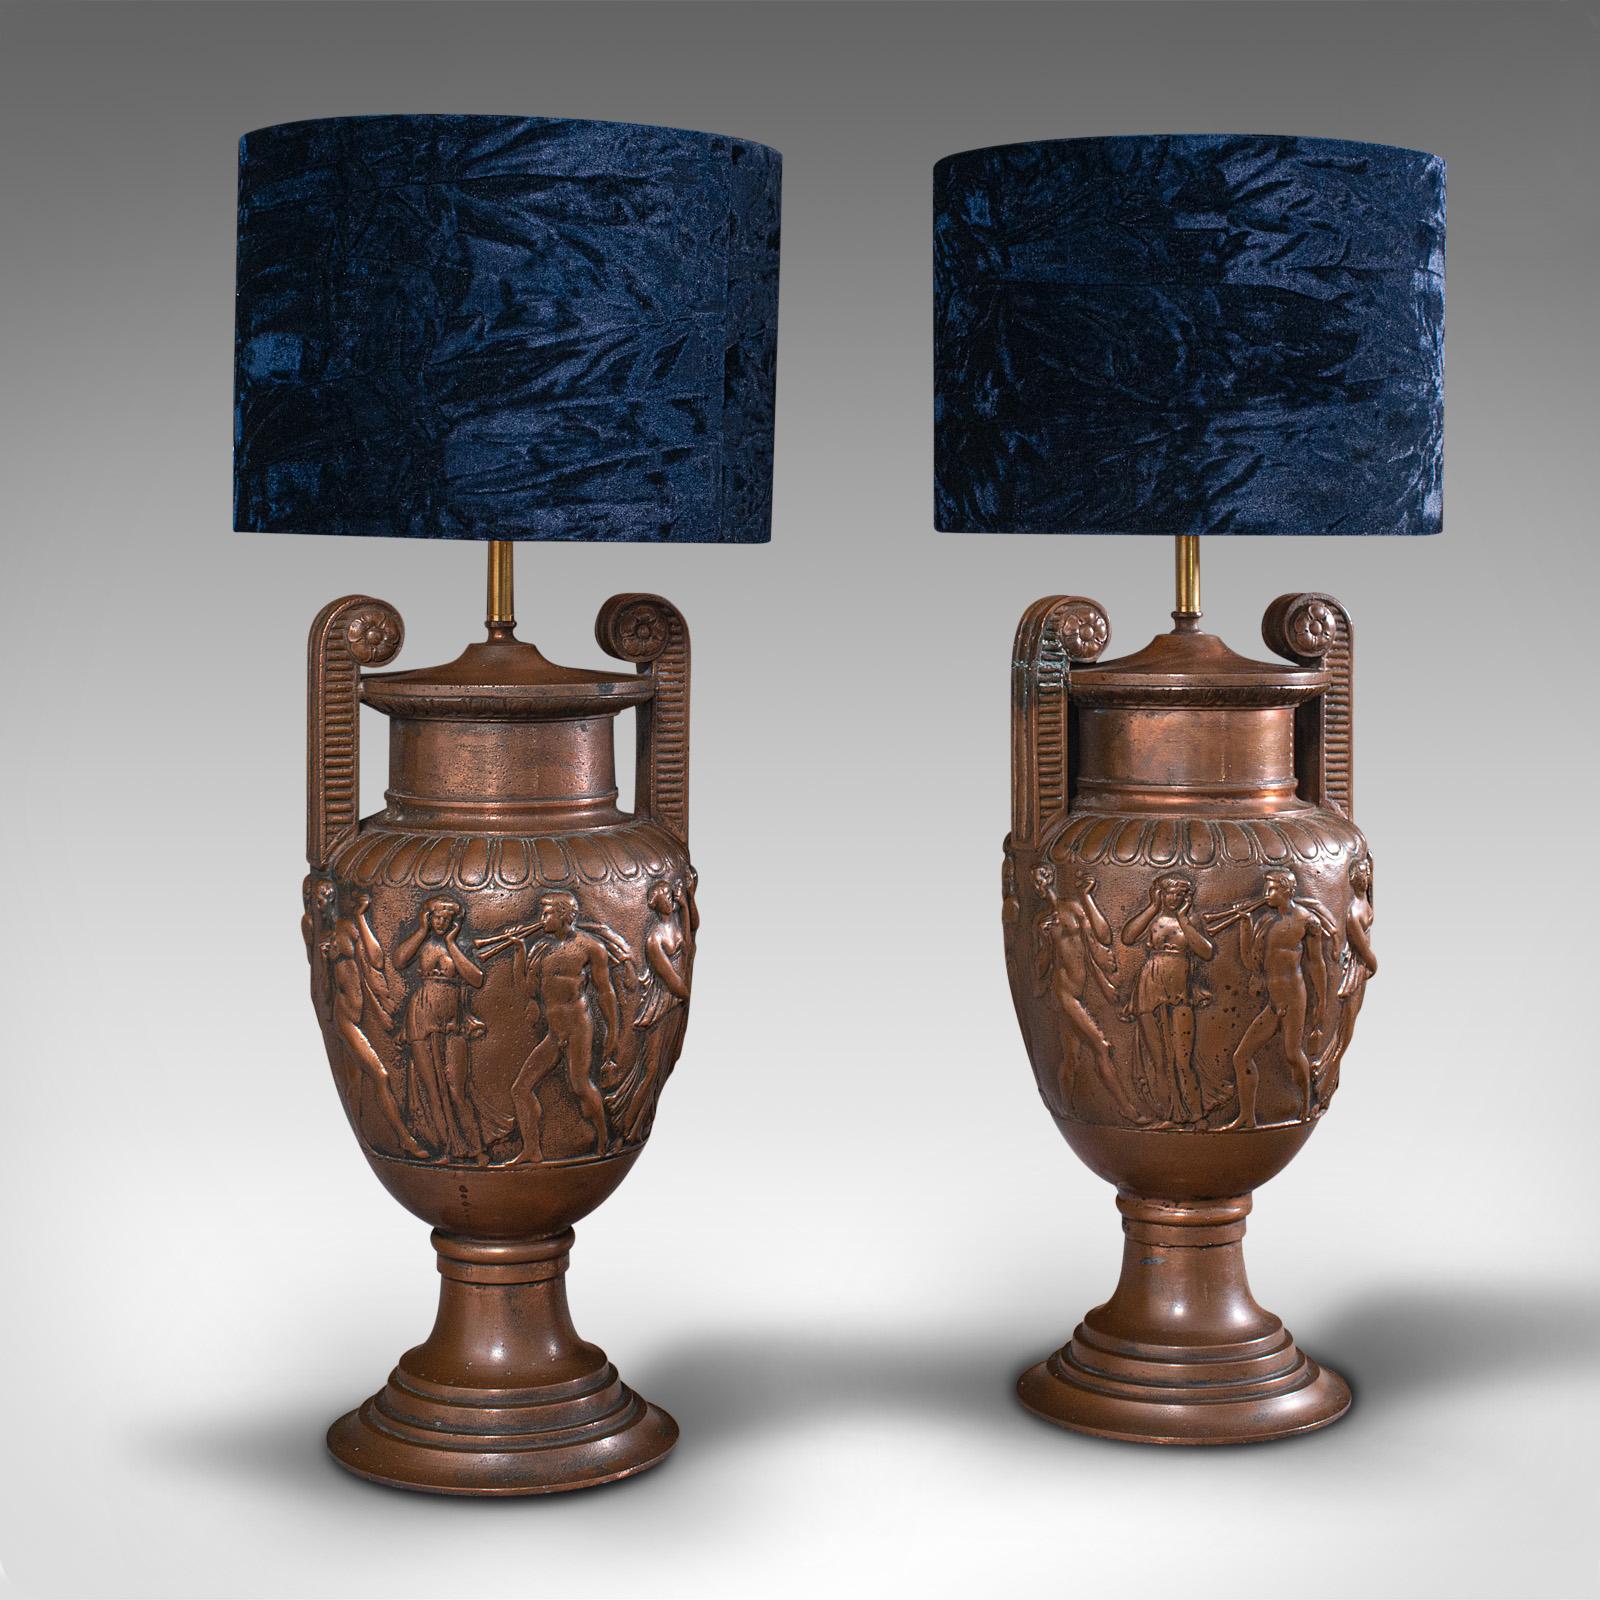 This is a pair of antique decorative lamps. An English, bronze table light with ancient Roman influence from the famous Townley Vase, dating to the late Victorian period, circa 1900.

Superb bronze homage to the Townley Vase, a large Roman vase of